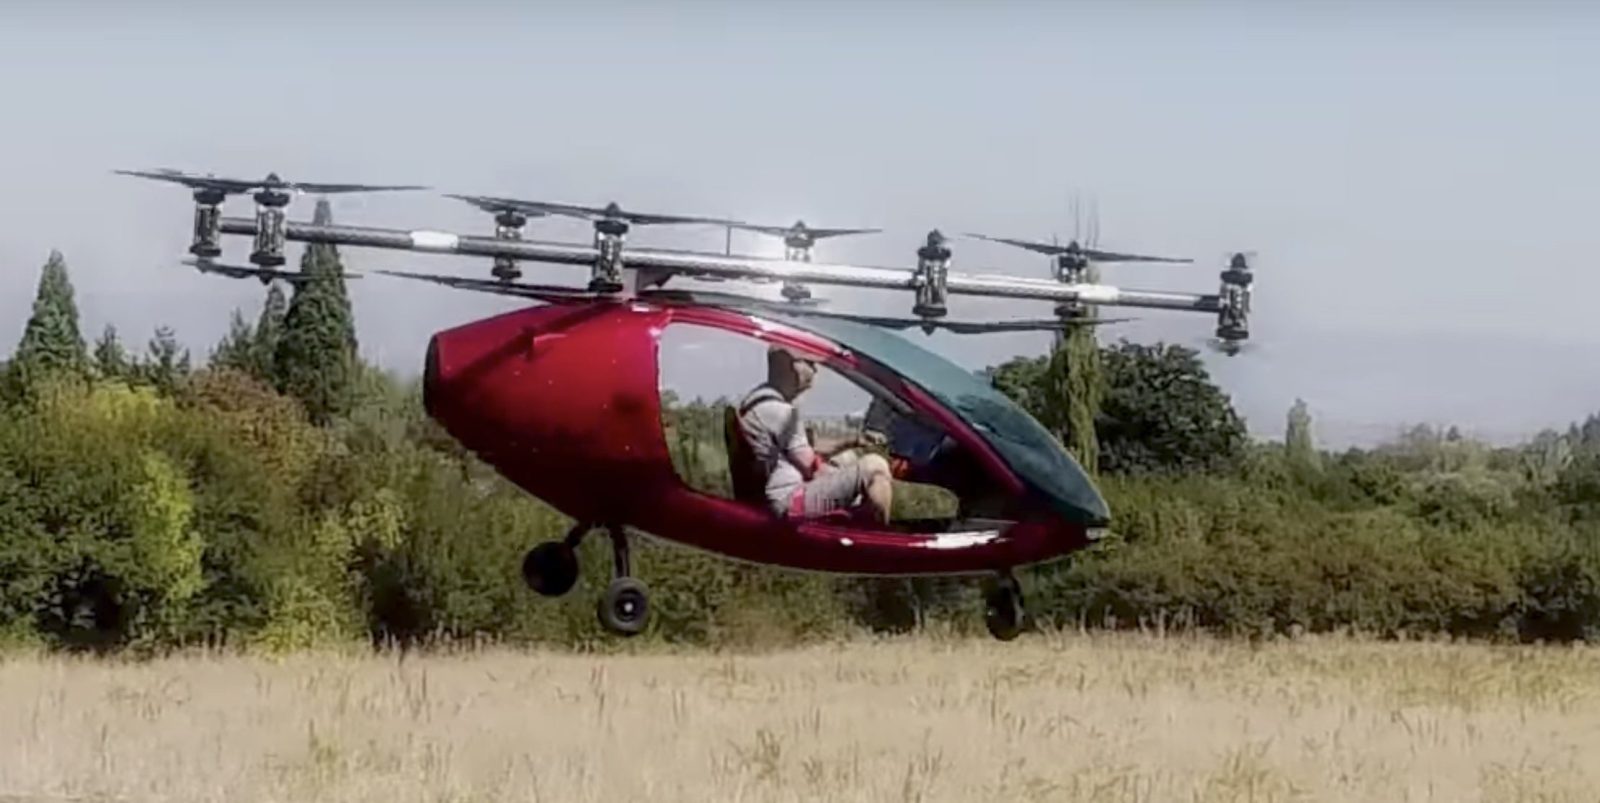 A new twoseater electric VTOL manned aircraft launches in burgeoning